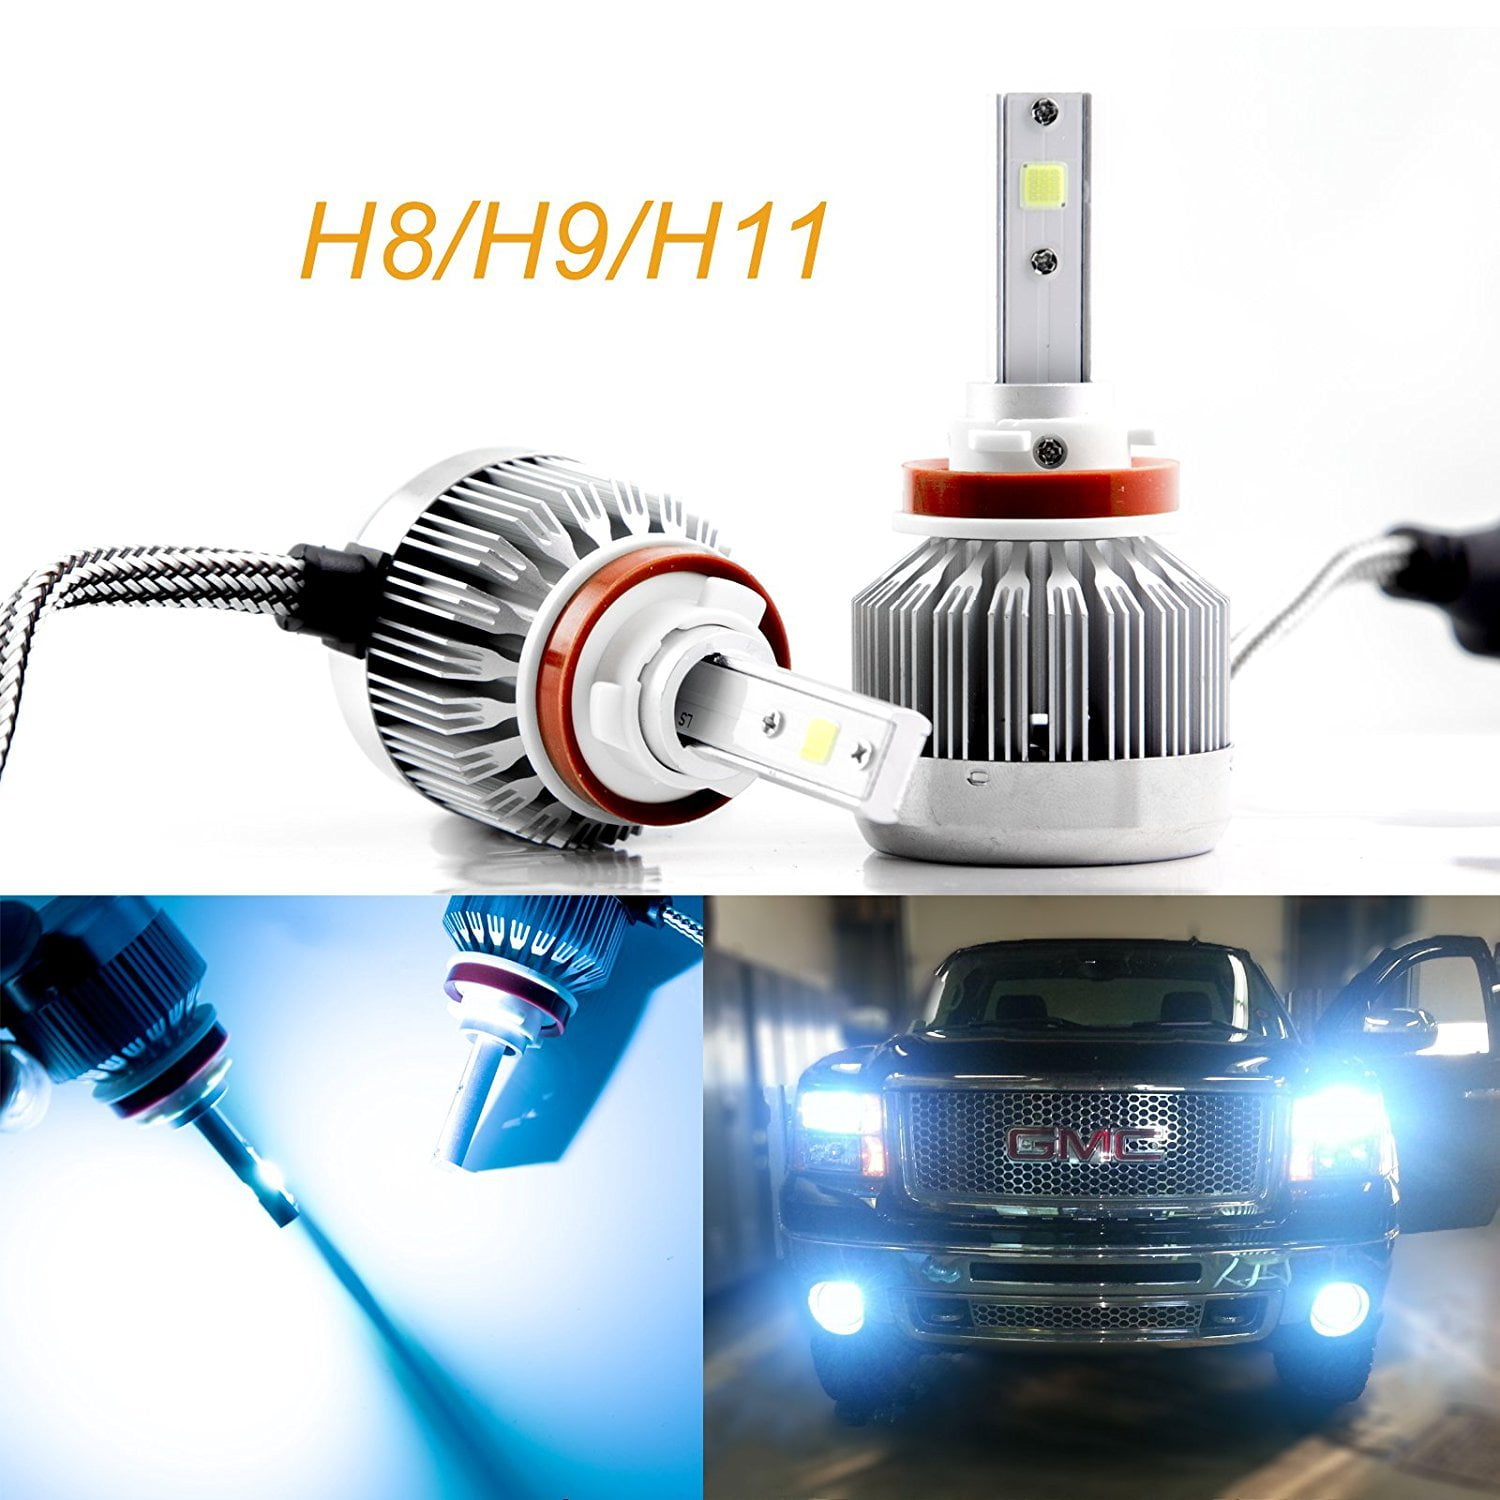 LYMOC H11 H8 LED Fog Light Bulbs LED Headlight bulbs 6500K Xenon Cool White 360-degree Illumination Lamps,12V Replacement for Cars Play and Plug Pack of 2 